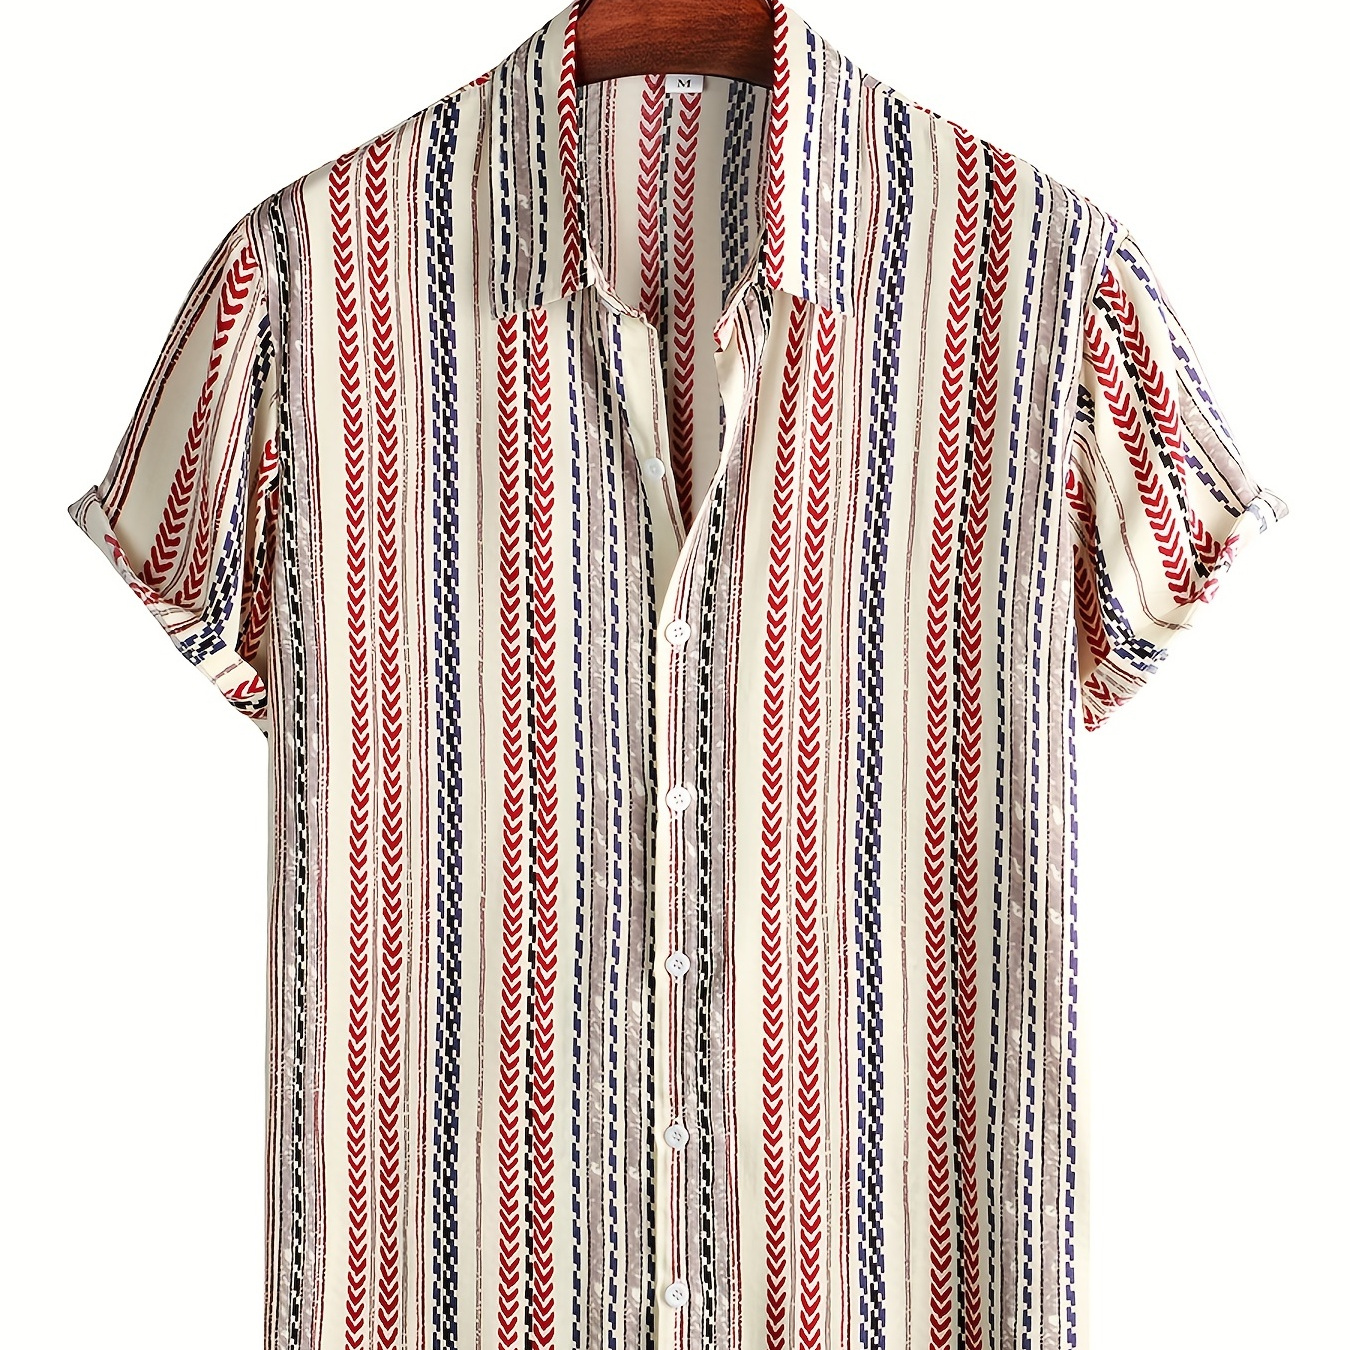 

Men's Vintage Lapel Shirt - Casual Button Up Short Sleeve With Vertical Stripes And Geometric Graphics For Spring And Fall Outdoor Activities